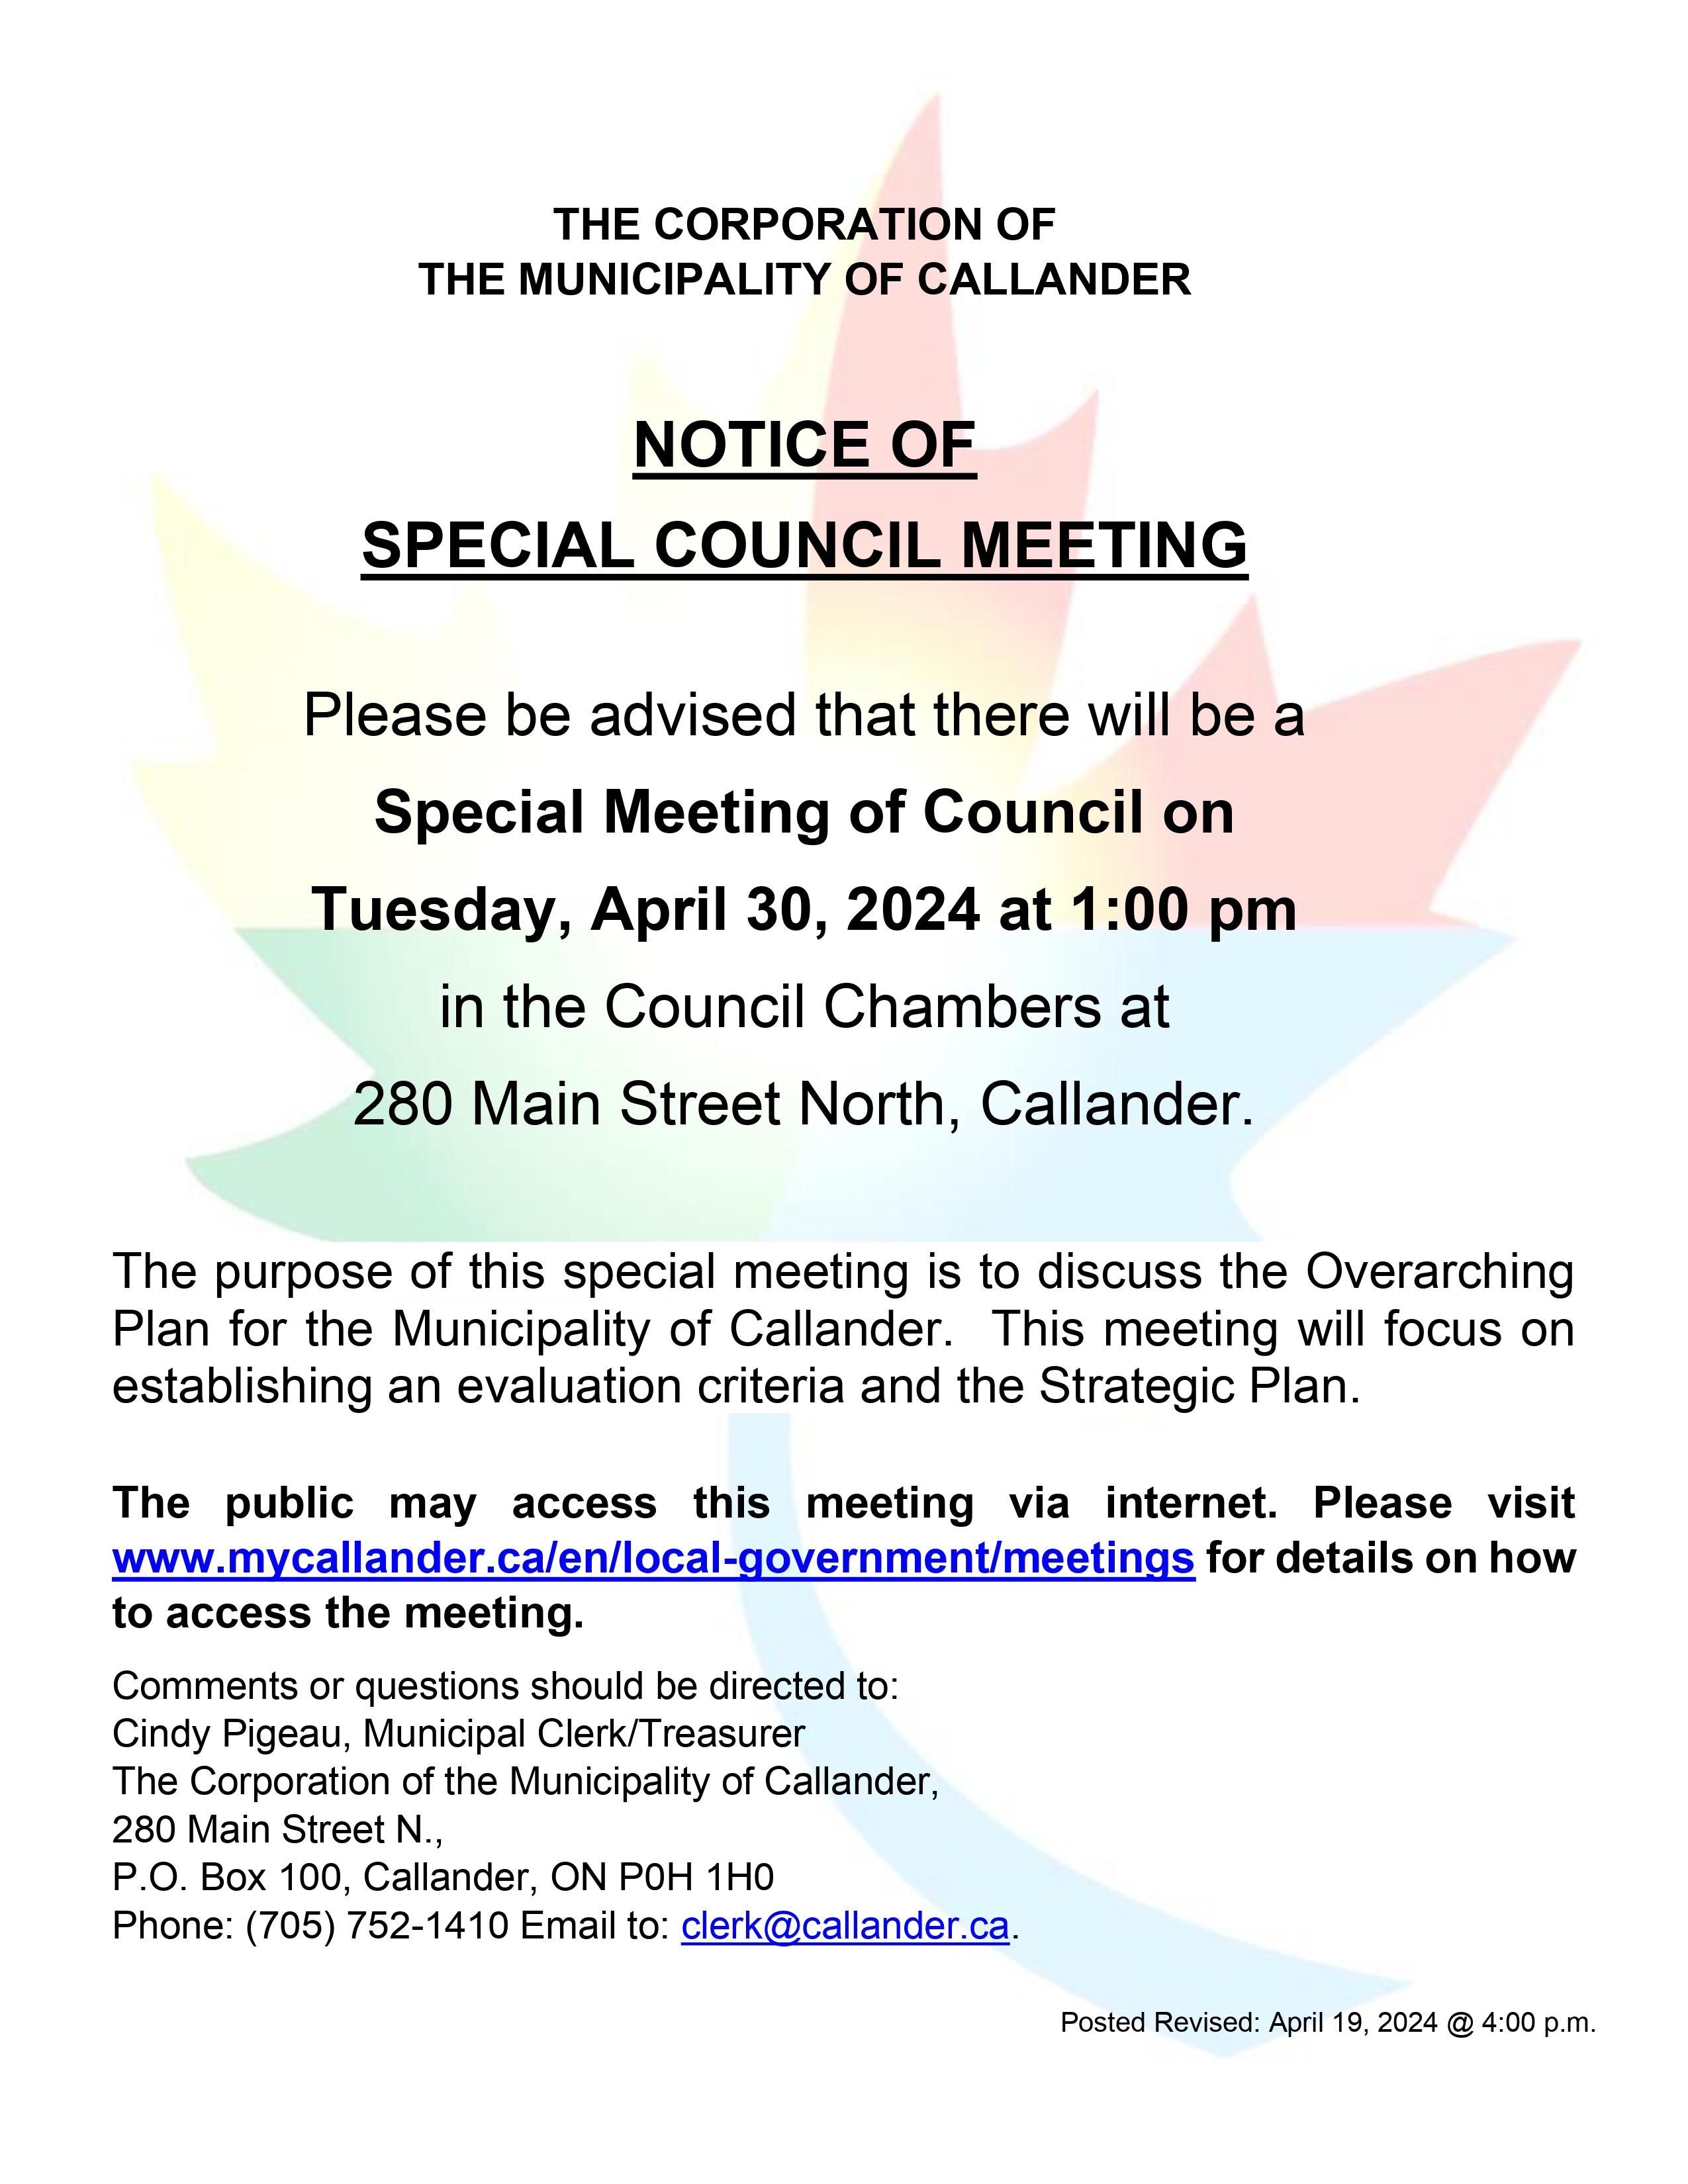 NOTICE OF SPECIAL COUNCIL MEETING